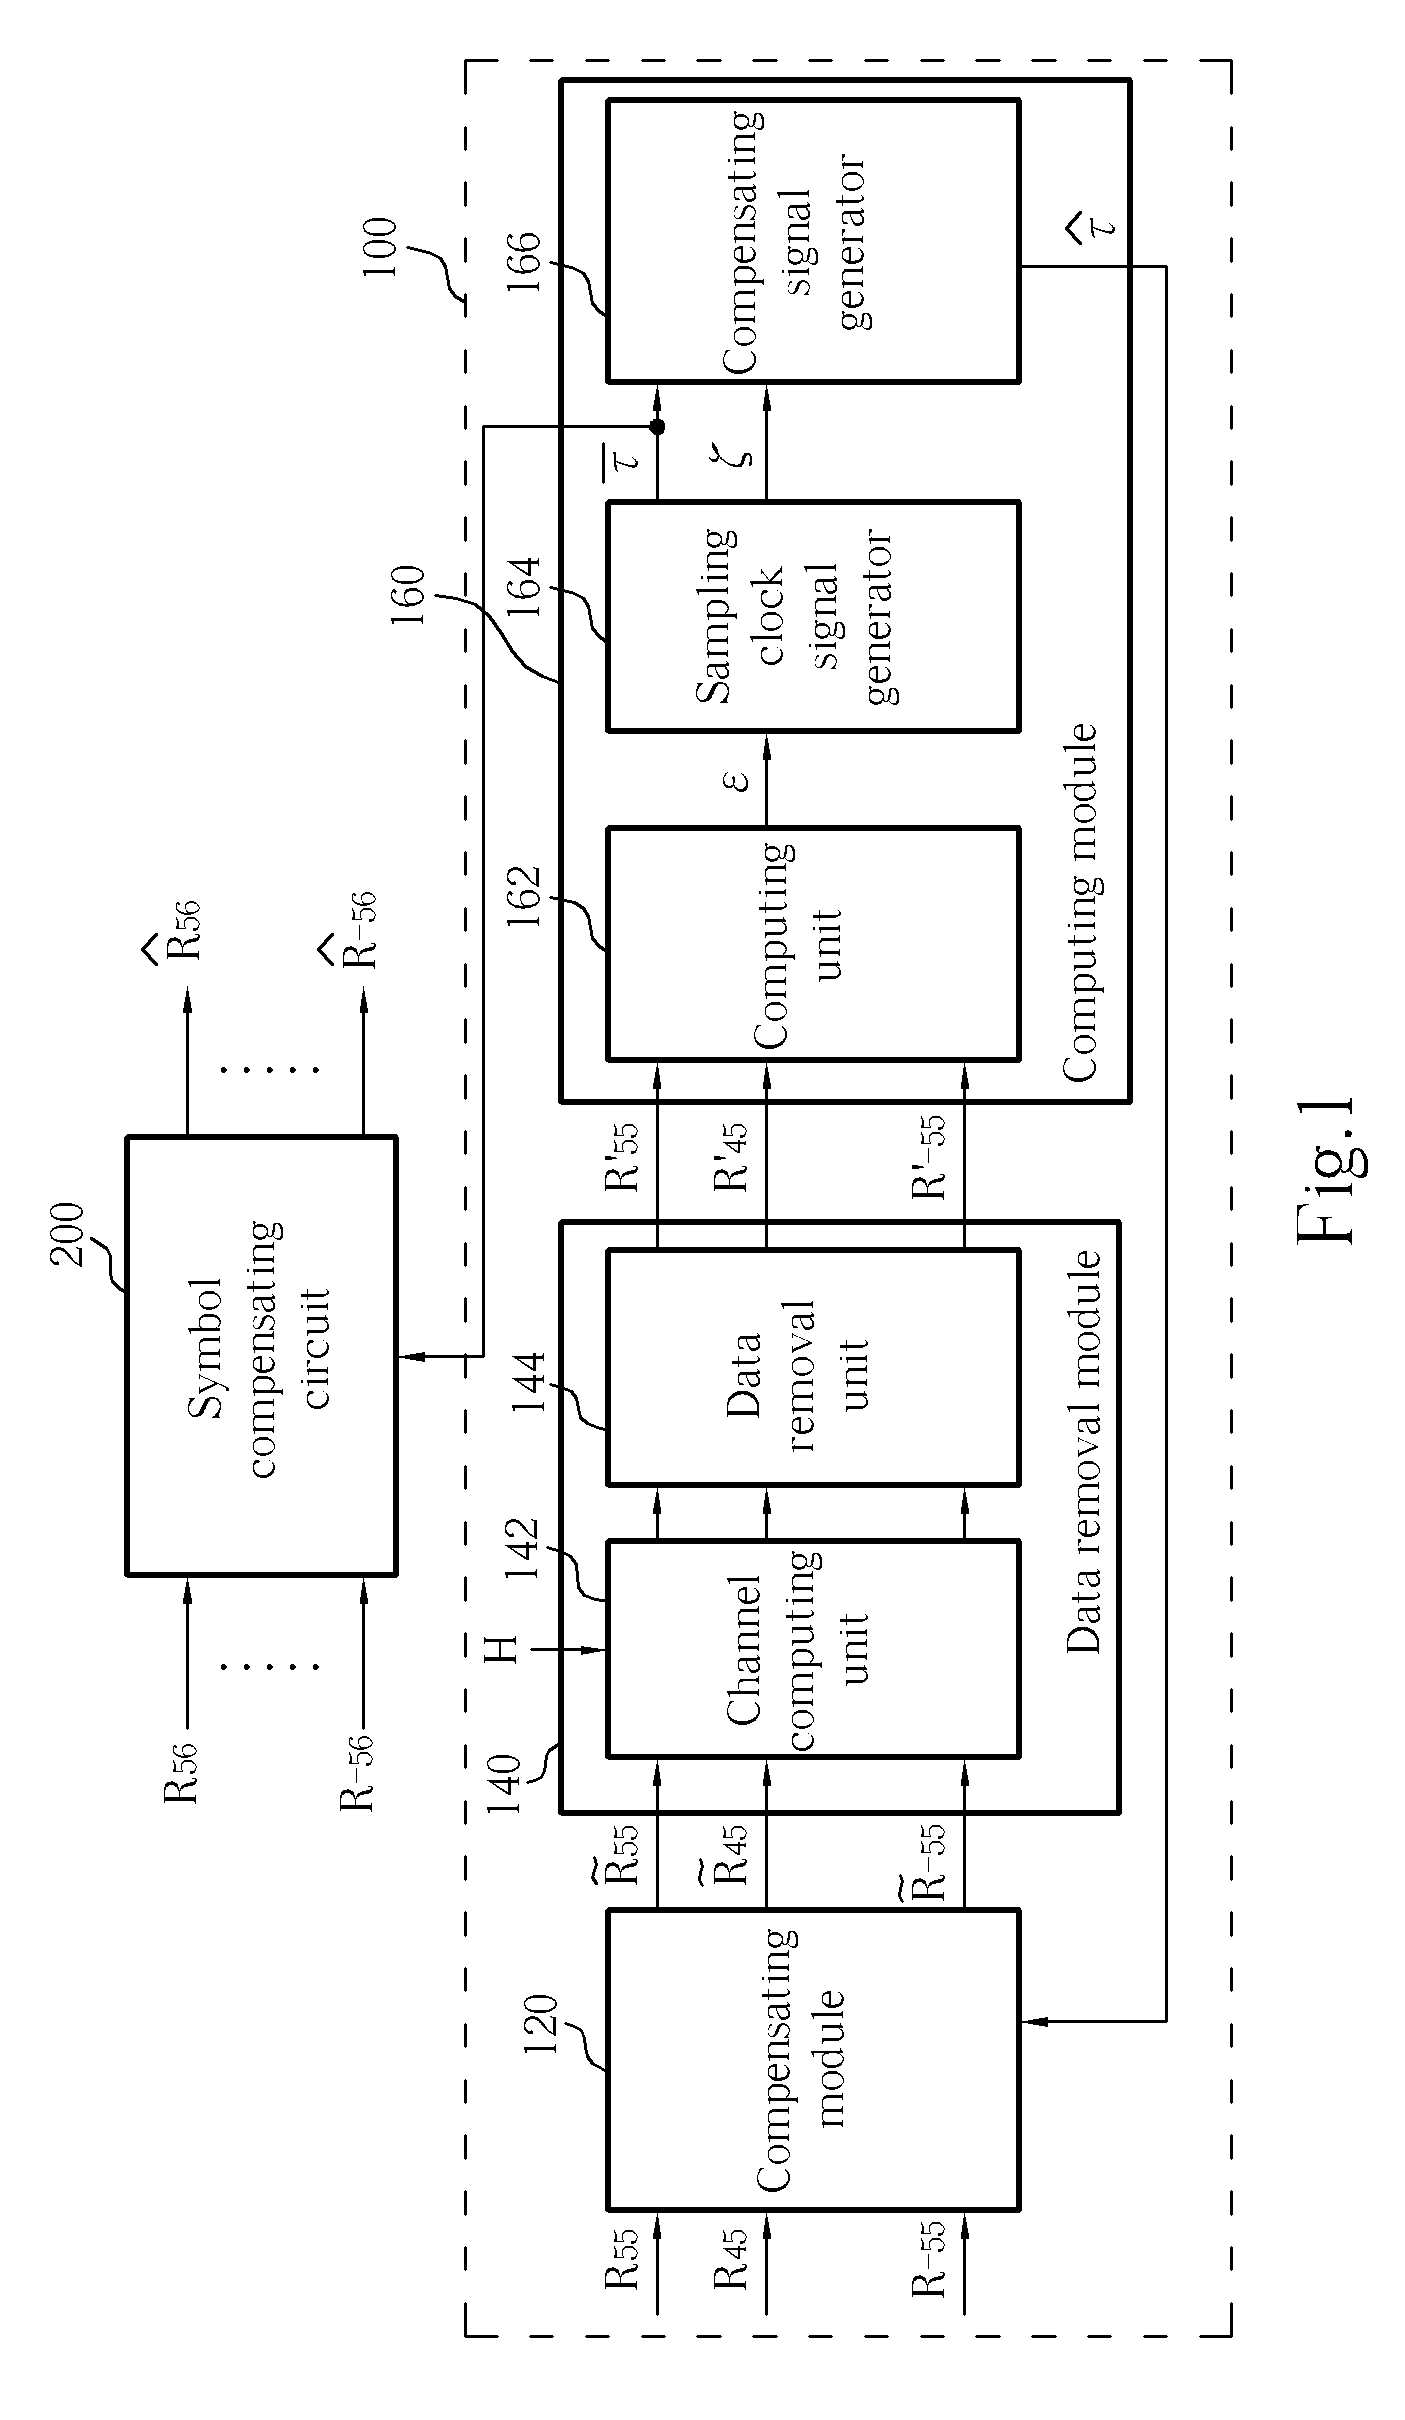 Apparatus and method for tracking sampling clock in multi-carrier communication system